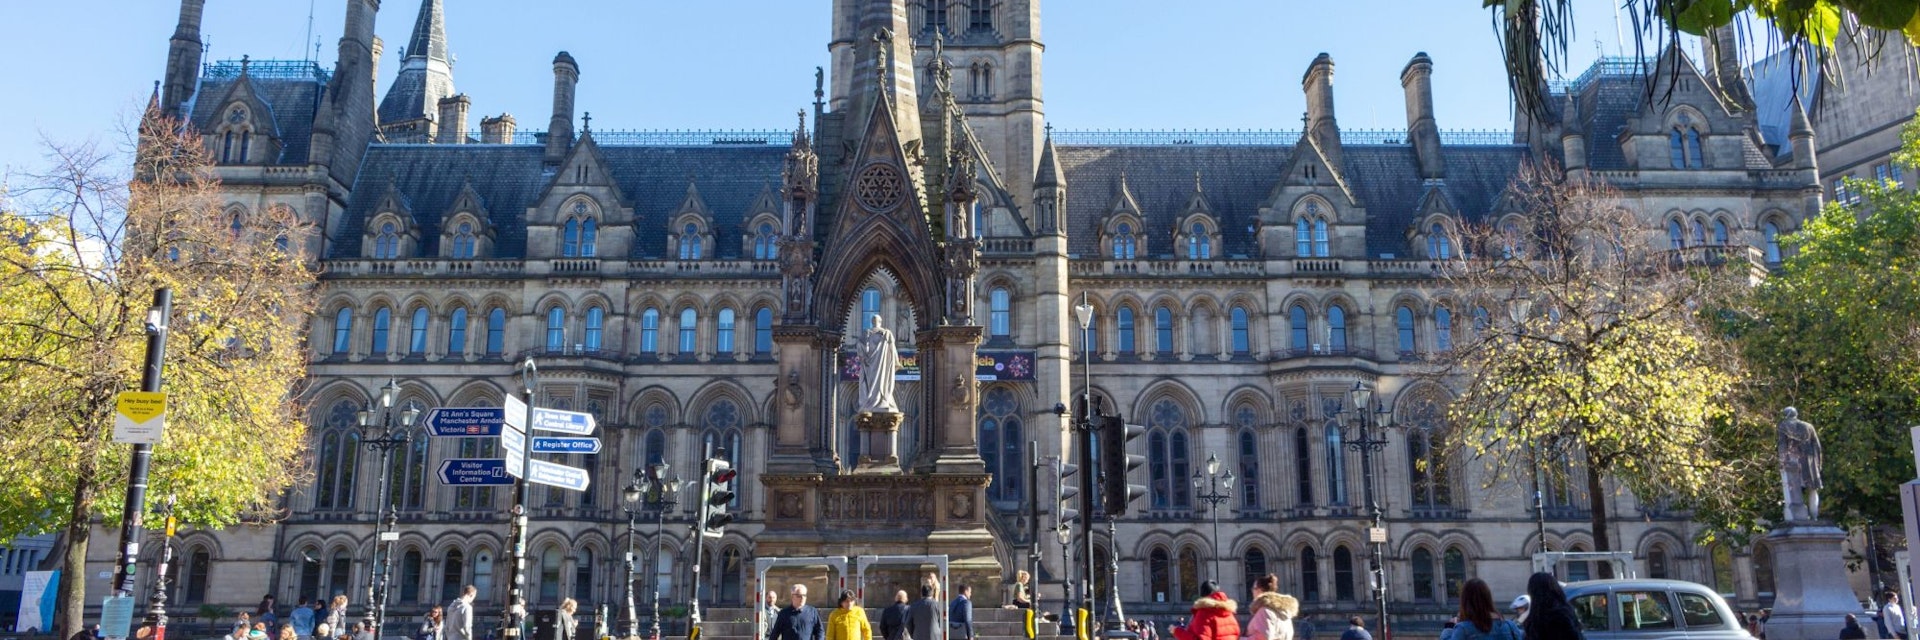 MANCHESTER - October 17th, 2018, Manchester Town Hall and Albert Memorial; Shutterstock ID 1281860161; your: Bridget Brown; gl: 65050; netsuite: Online Editorial; full: POI Image Update